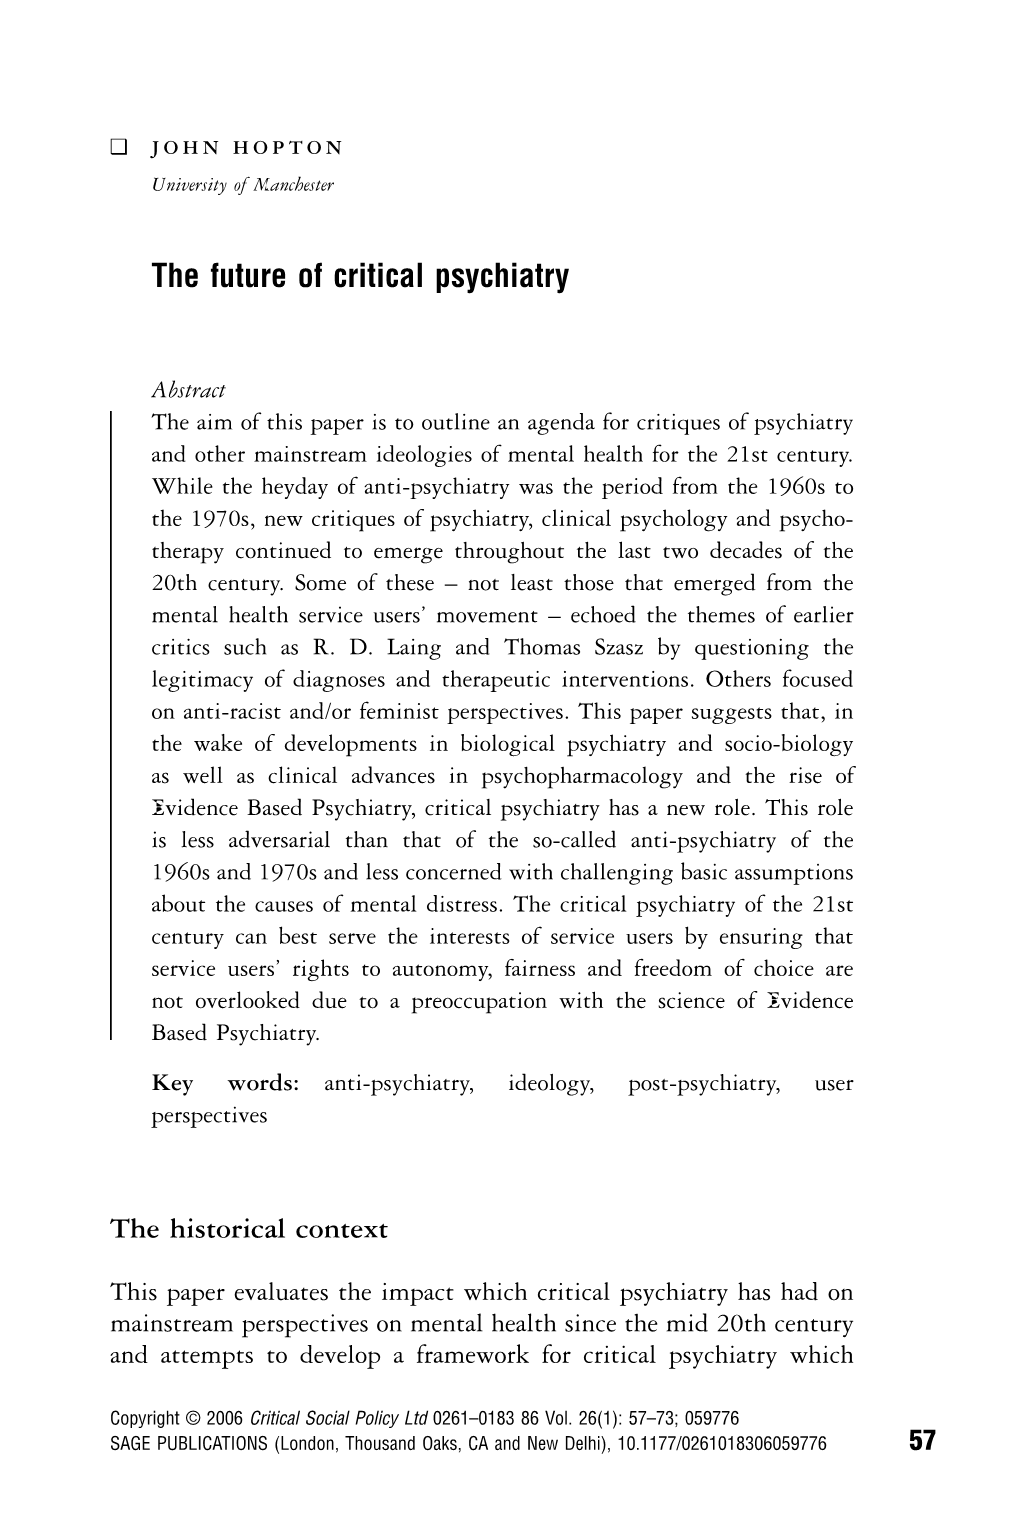 The Future of Critical Psychiatry